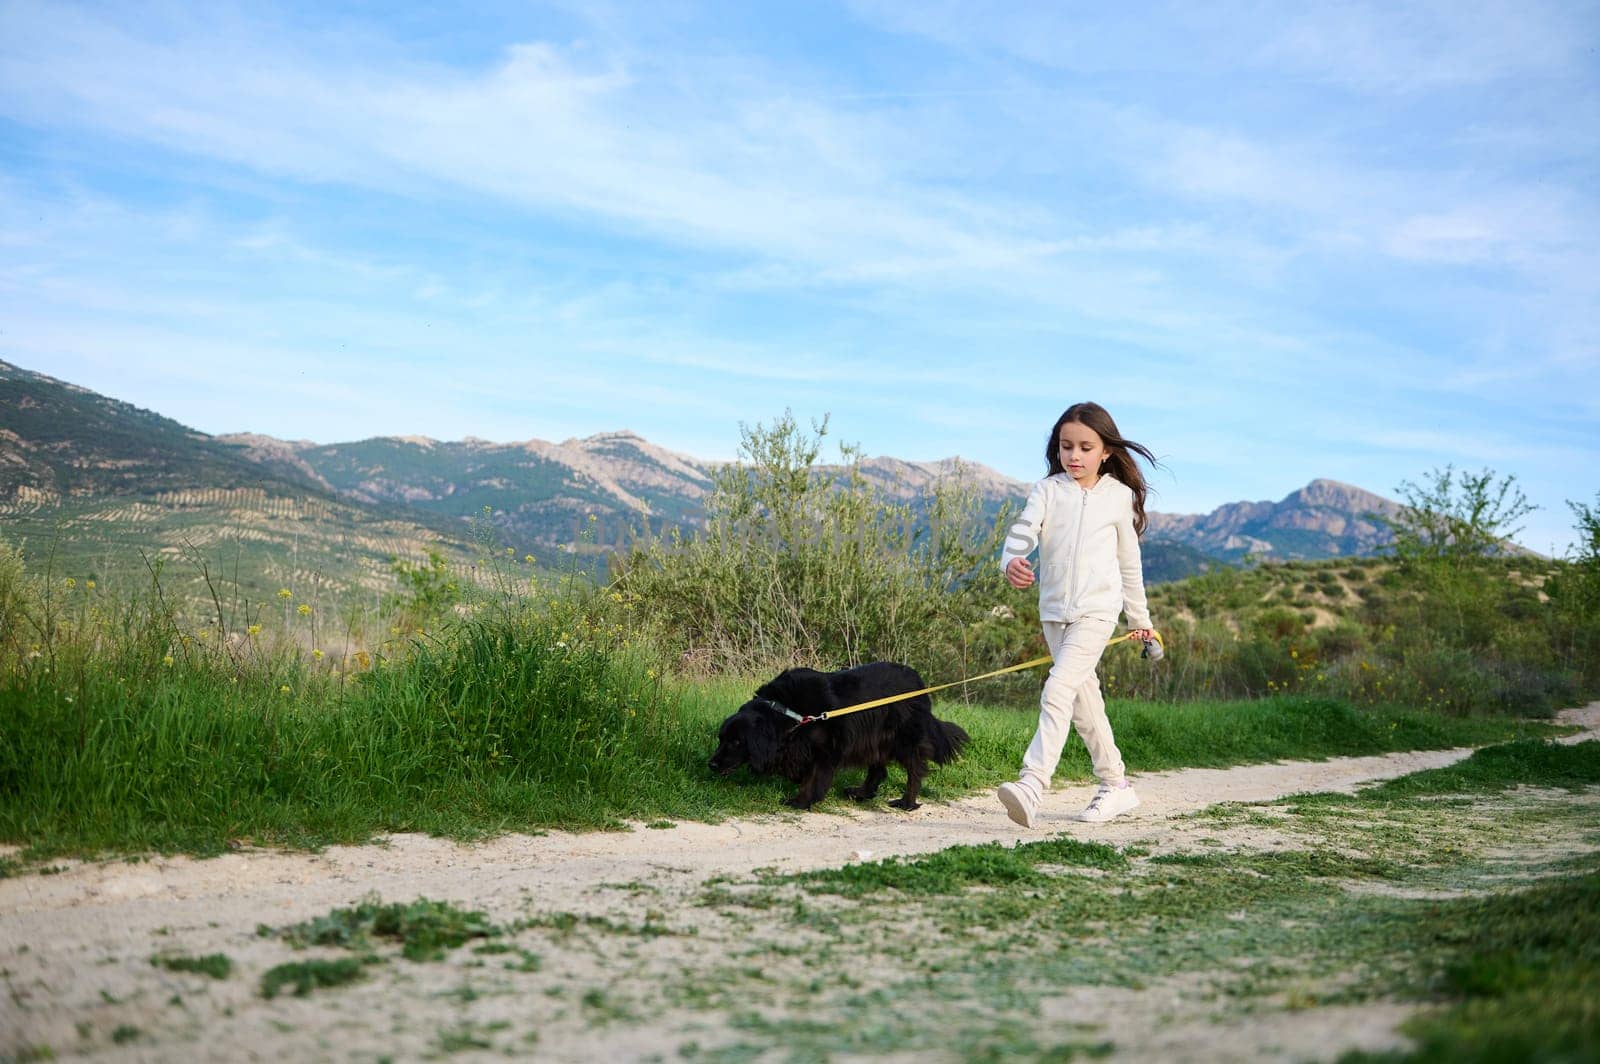 Adorable European child girl walking her pedigree dog, a black purebred cocker spaniel in the hills mountains nature outdoors on a sunny day. People. Nature and playing pets concept by artgf